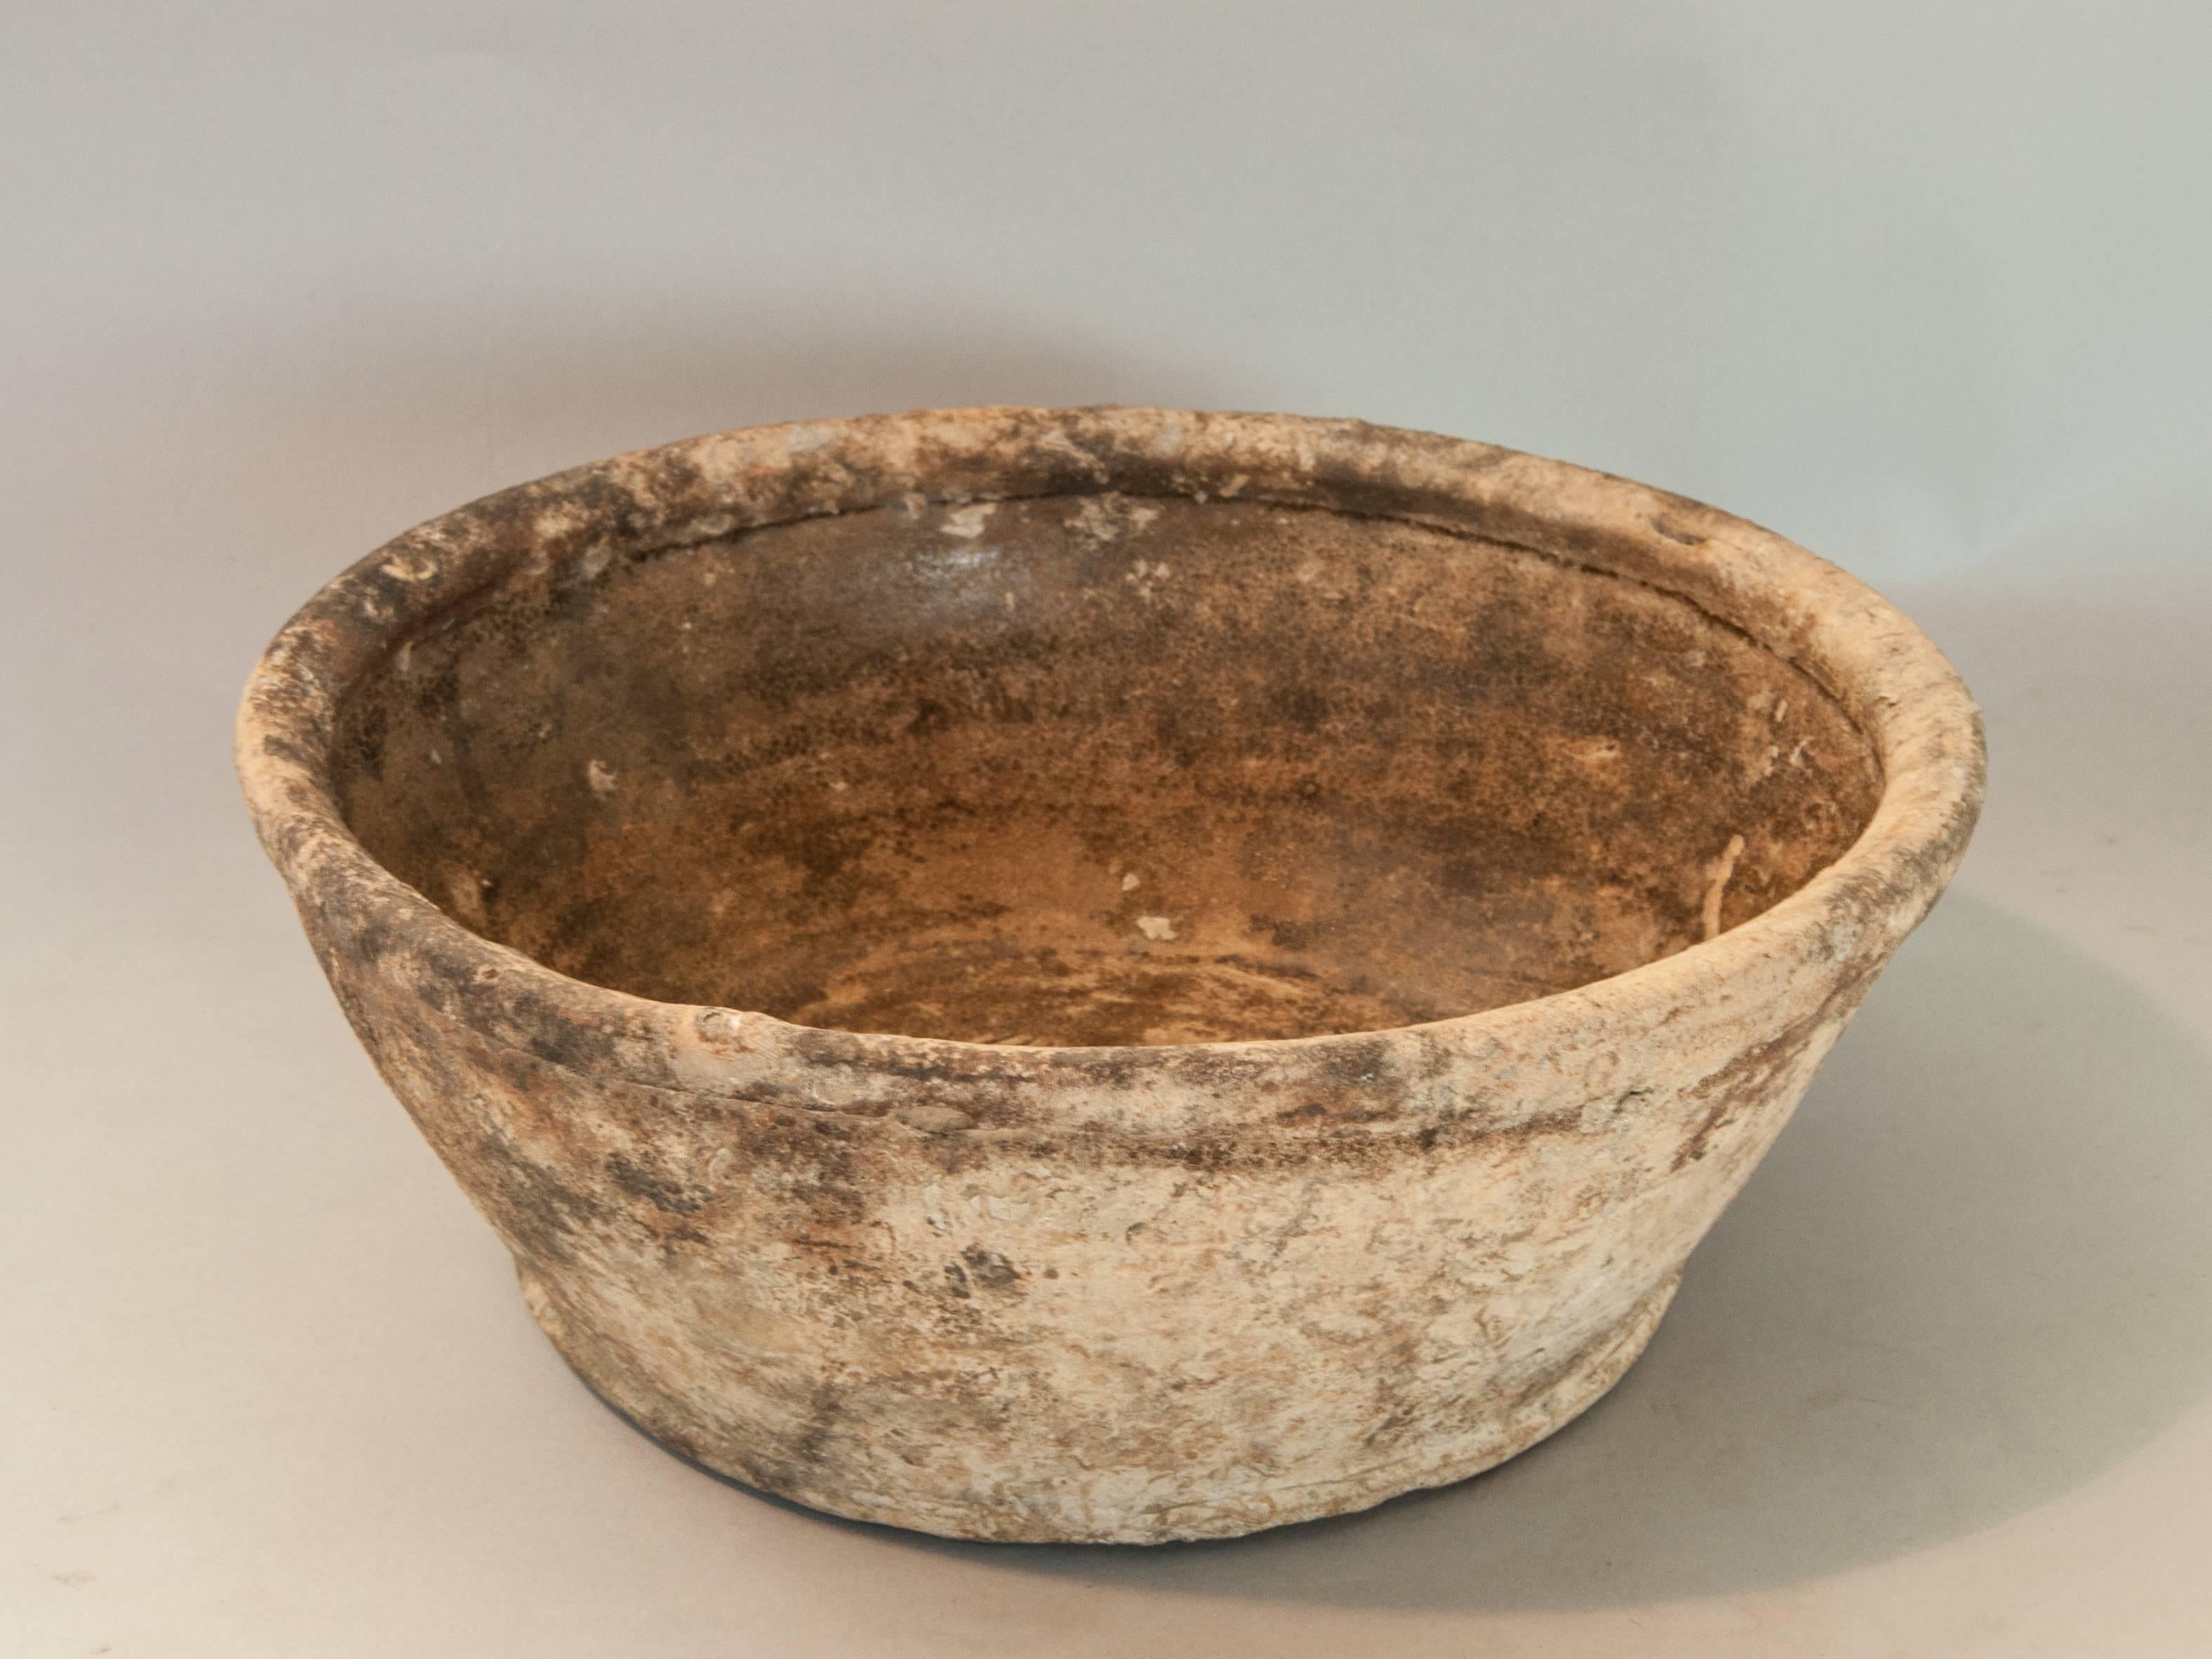 Chinese glazed ceramic bowl. Song Dynasty. Salvaged off the North Coast of Java.
This brown glazed bowl was salvaged from a shipwreck off the northern coast of Java, Exposure has led to deterioration of the glaze, and lends the piece a distinctive